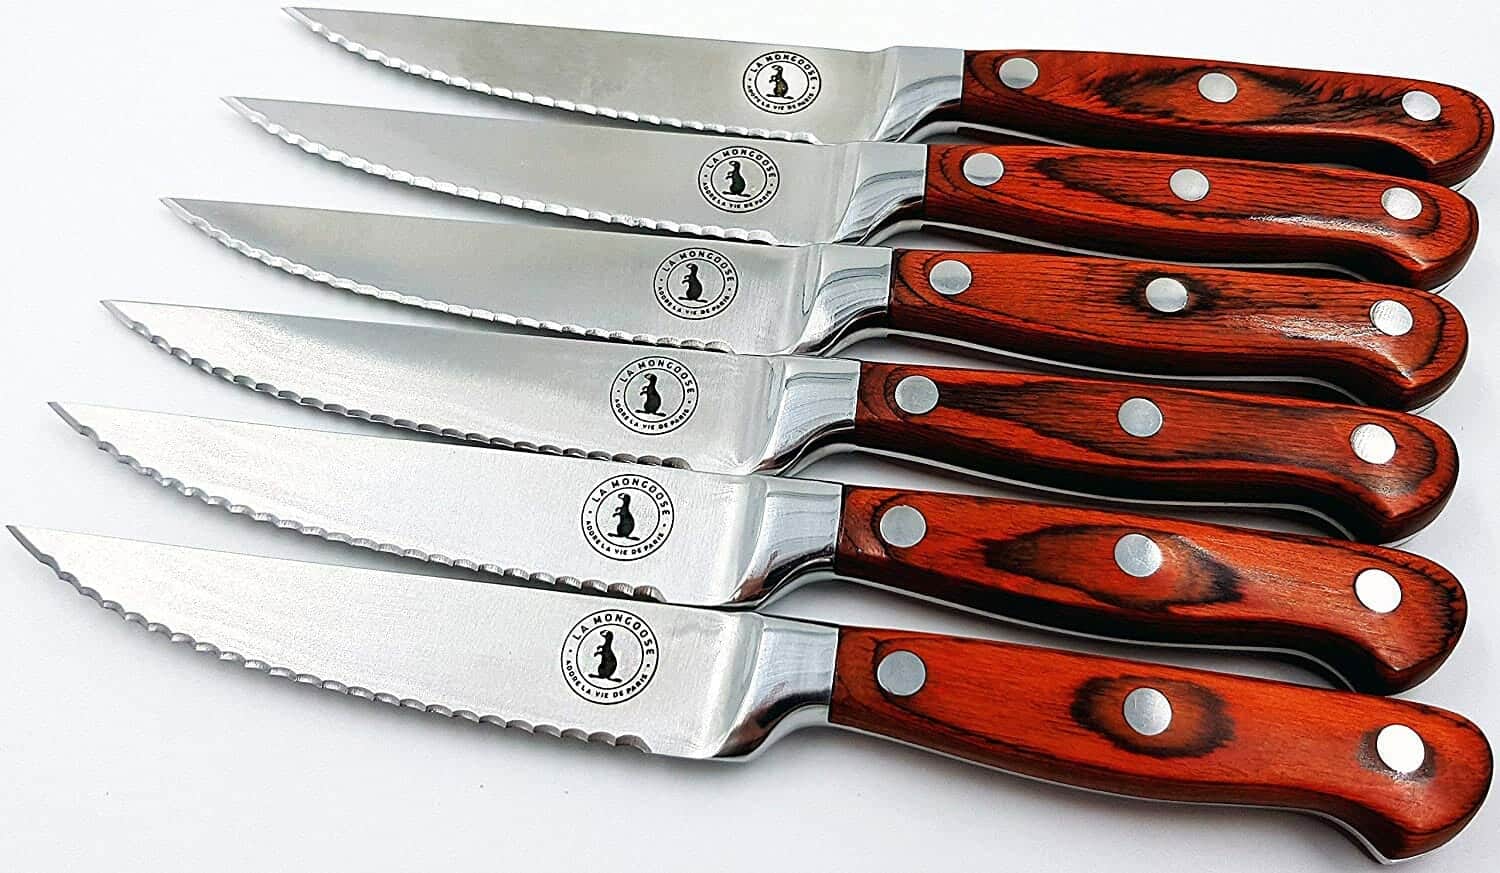 If you are looking for a budget serrated steak knife set the La Mongoose 4 piece set it hard to beat. 